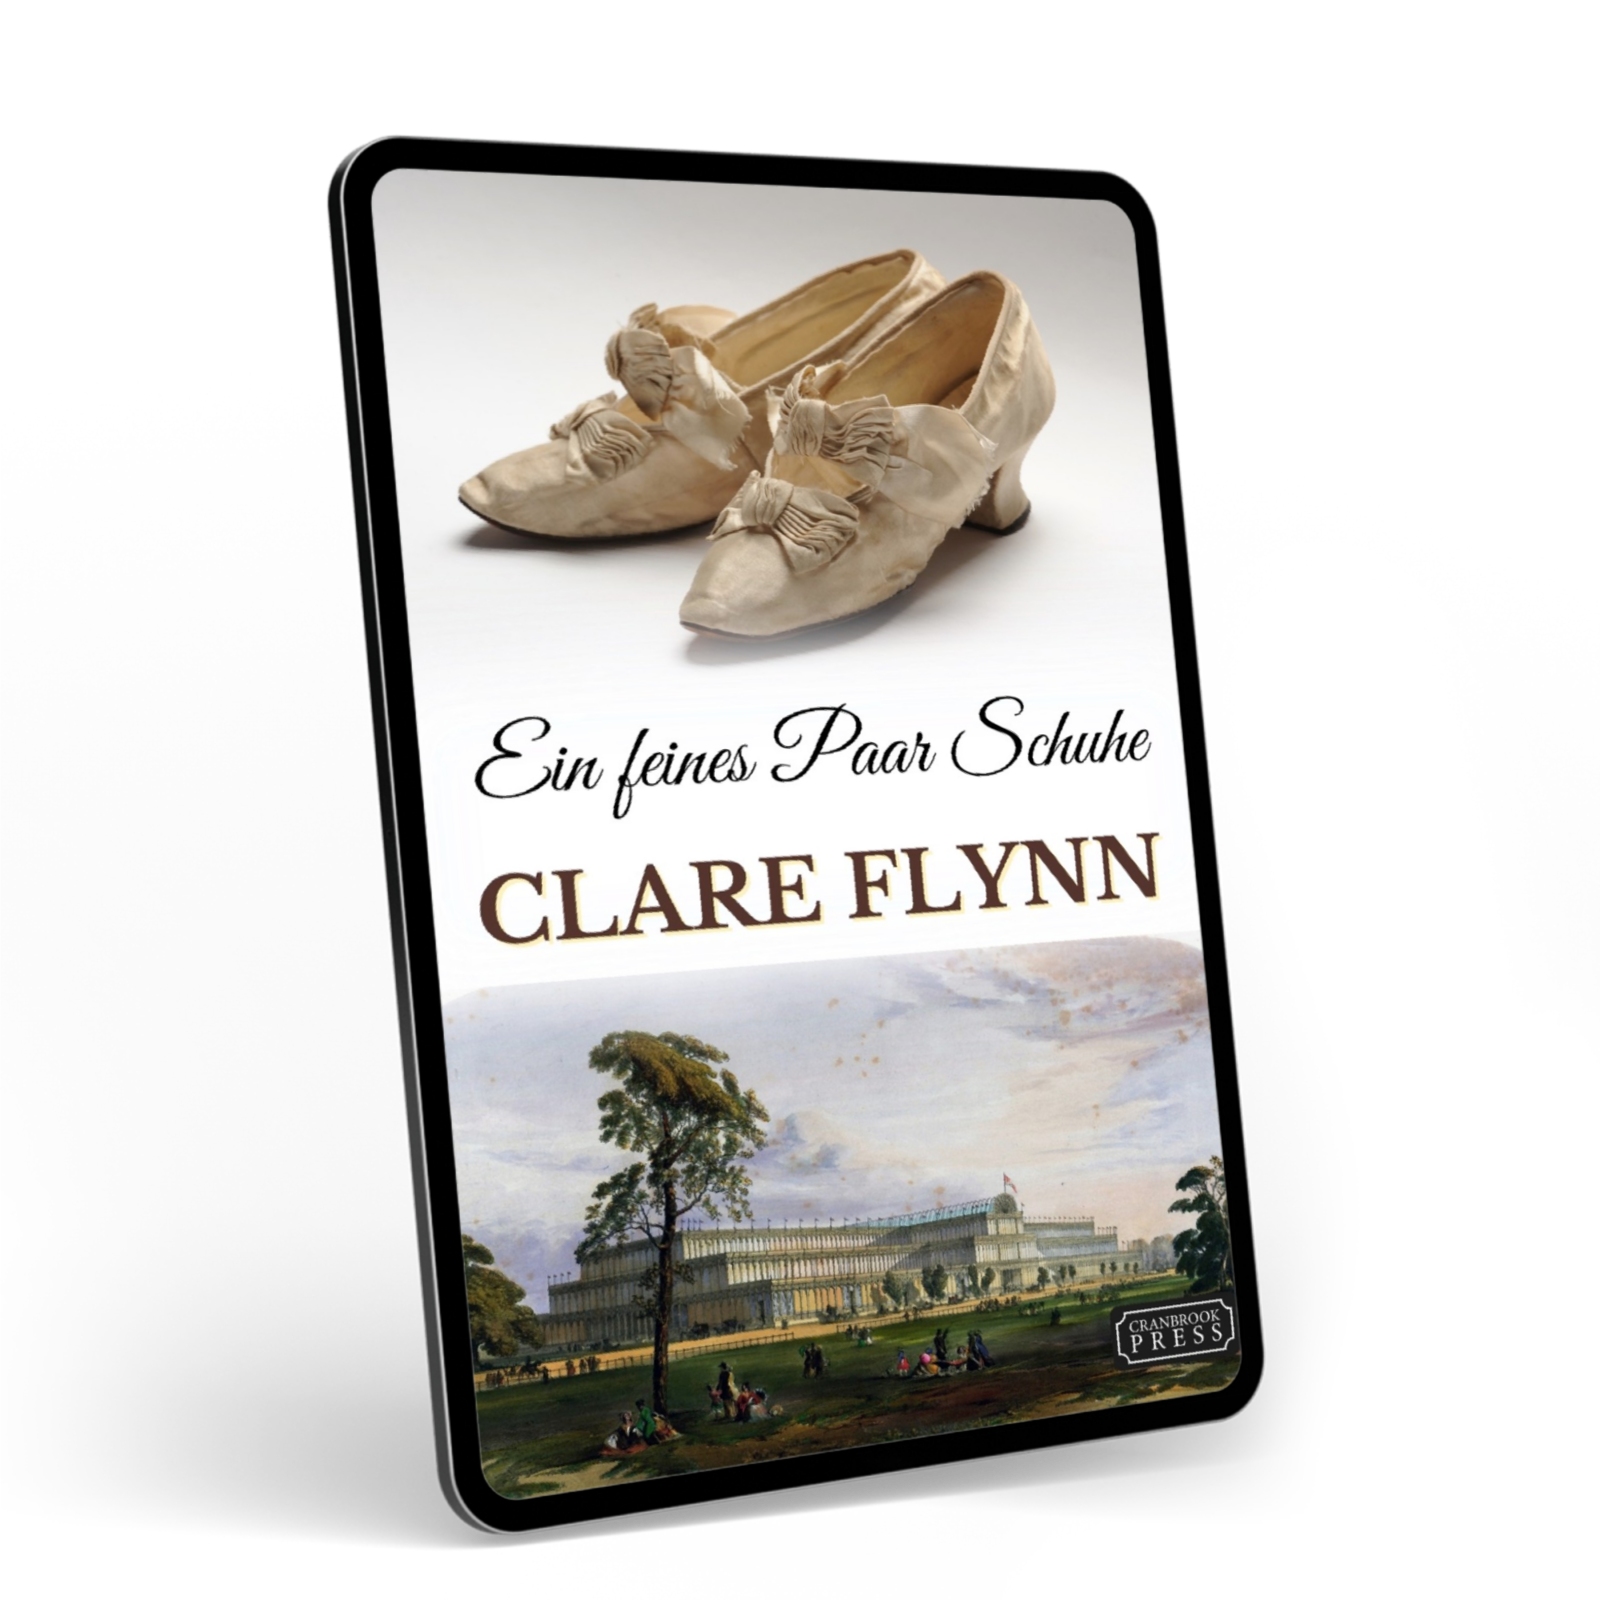 A-Fine-Pair-of-Shoes-3-D-Book-Cover-TRANS-209287